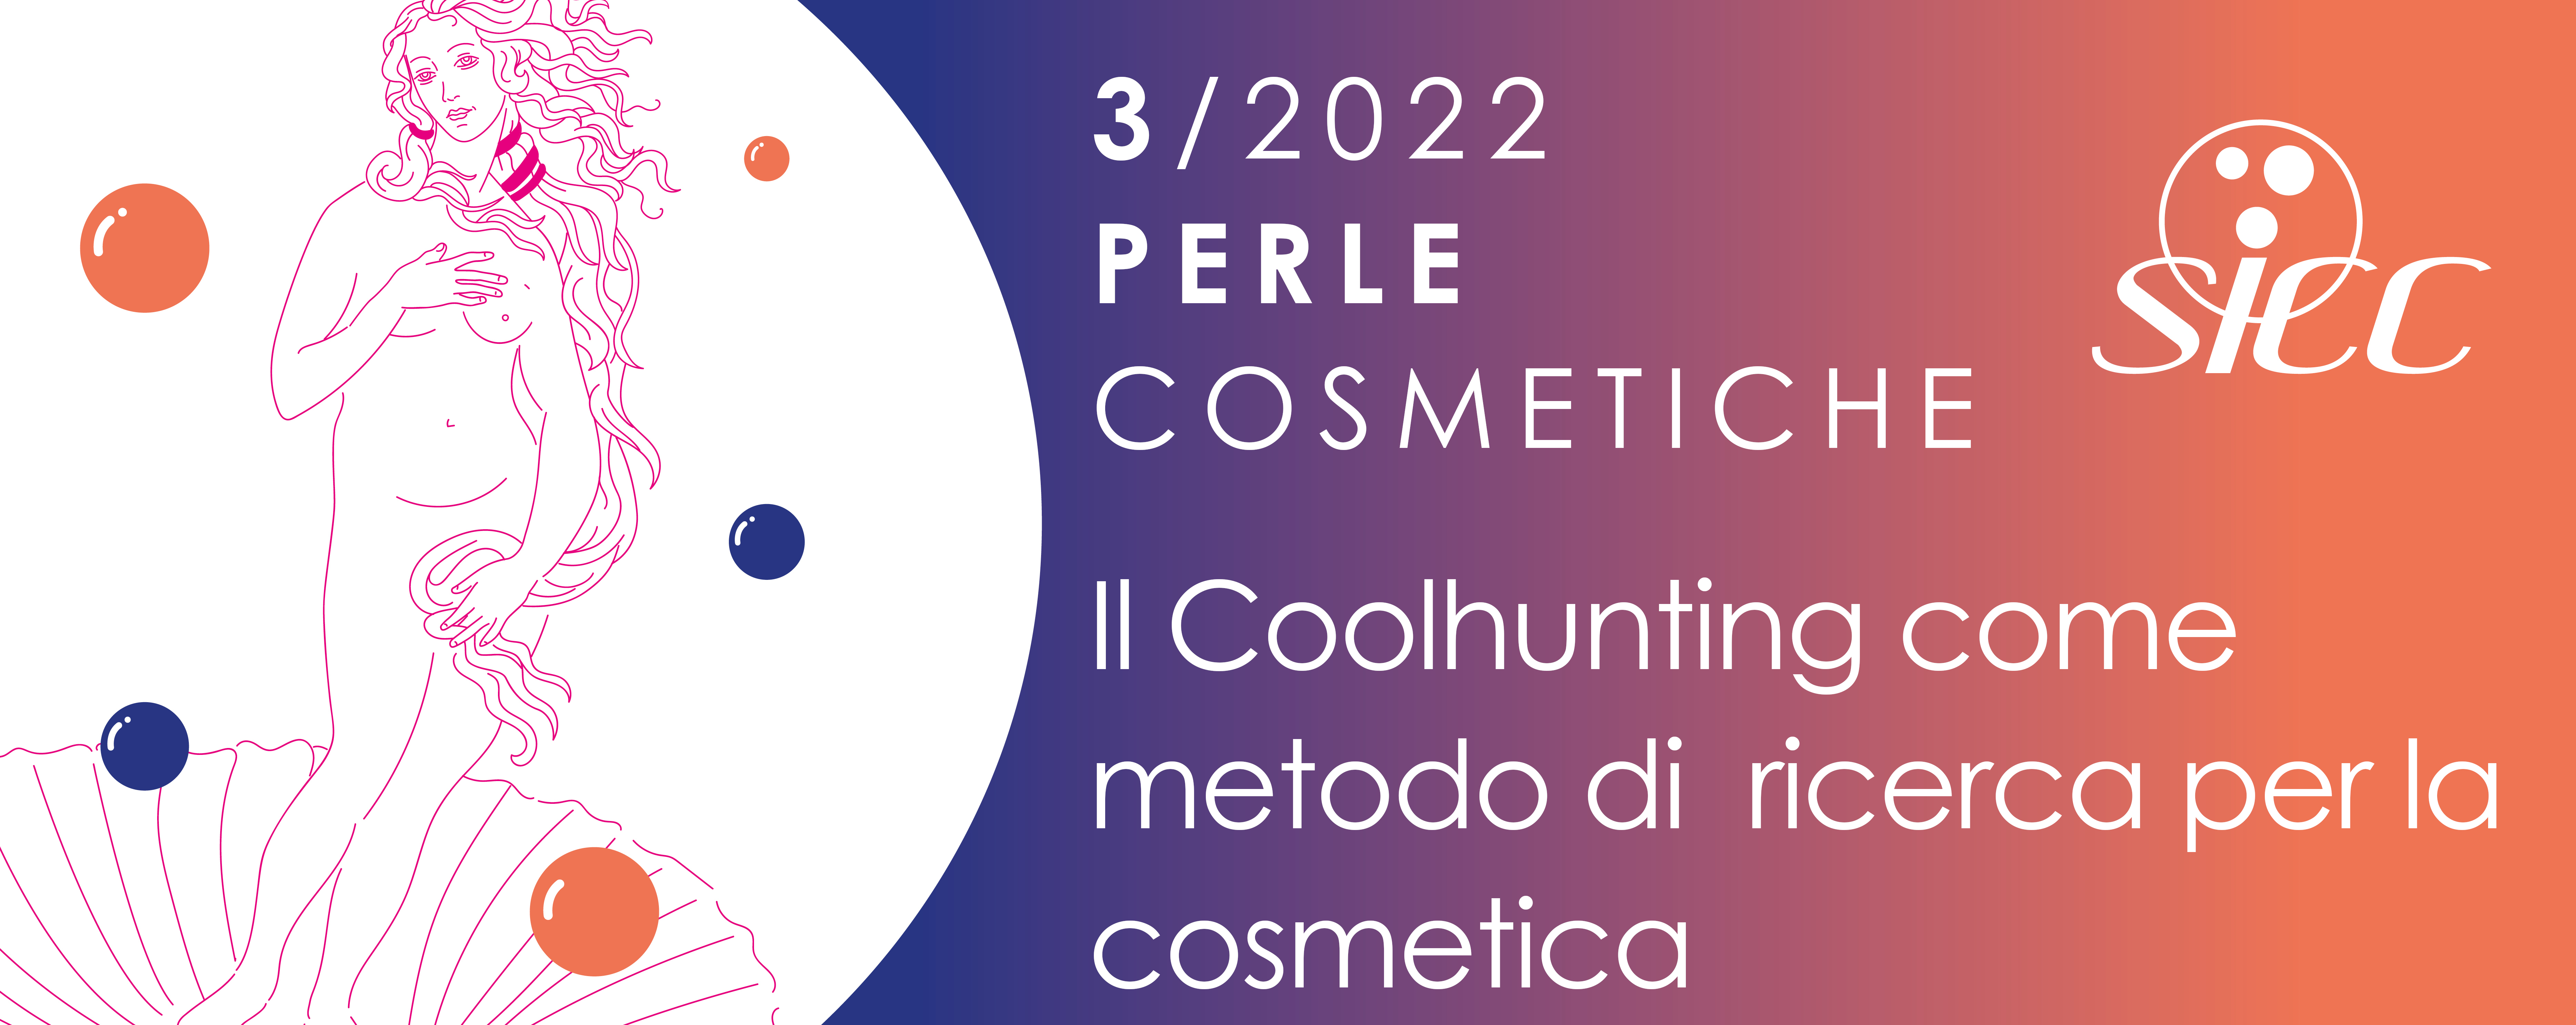 COSMETIC PEARL N 3/2022 The Coolhunting as a method for cosmetics